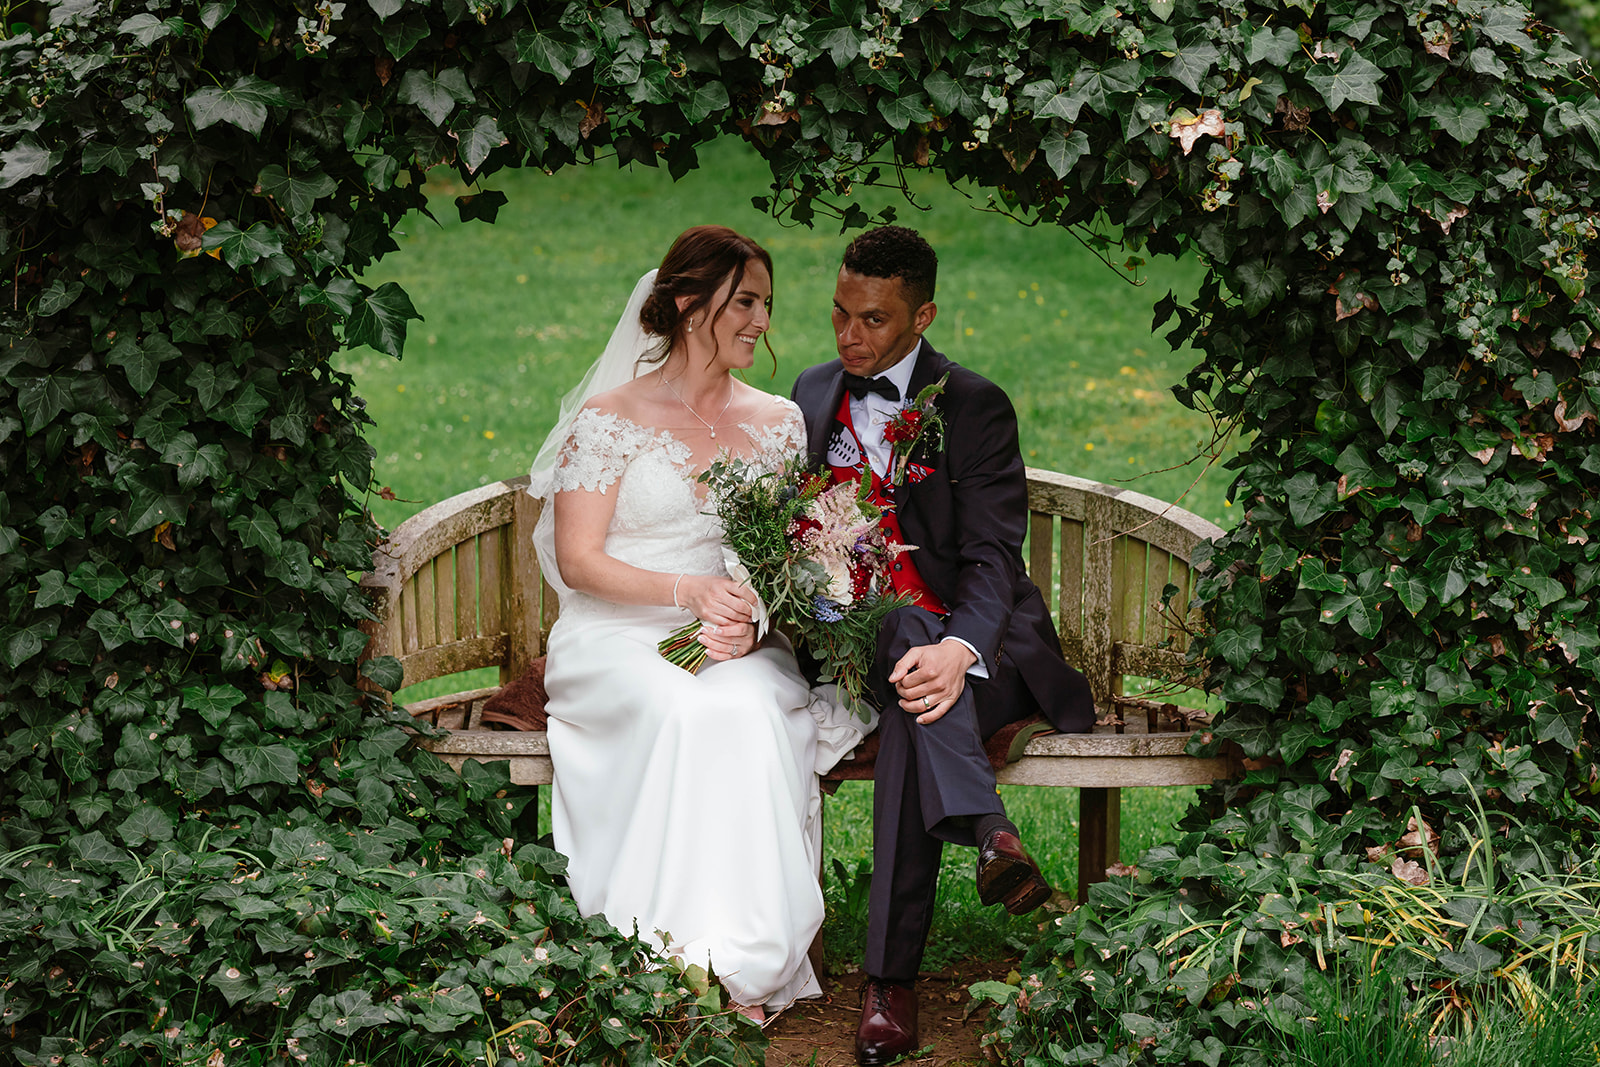 Bride and Groom sat on bench during portraits